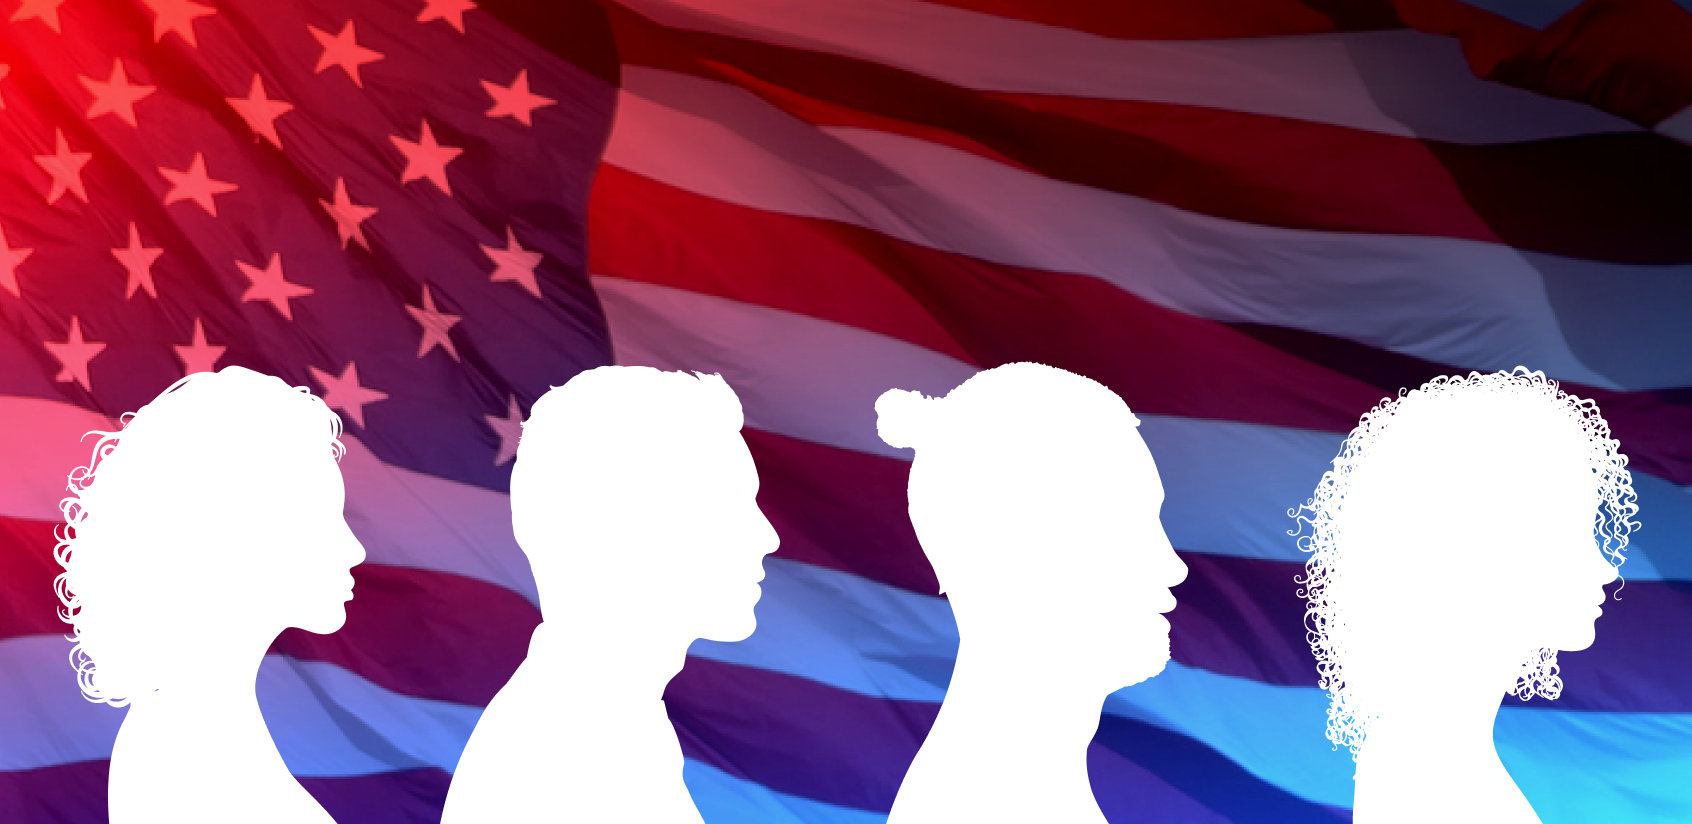 Silhouettes of four people in front of an American flag waving in the wind.